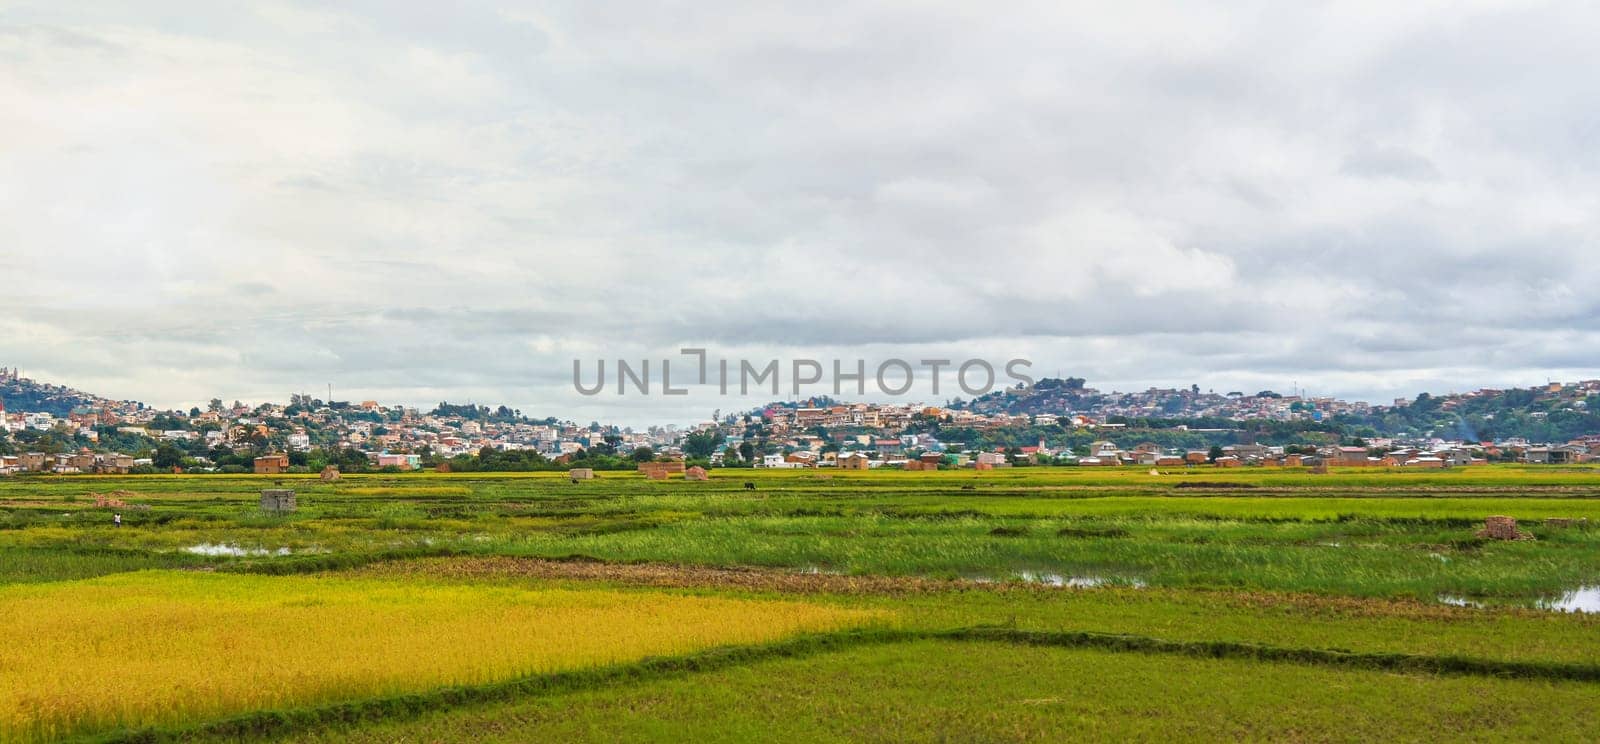 Typical landscape of Madagascar on overcast cloudy day - people working at wet rice fields in foreground, houses on small hills of Antananarivo suburb by Ivanko